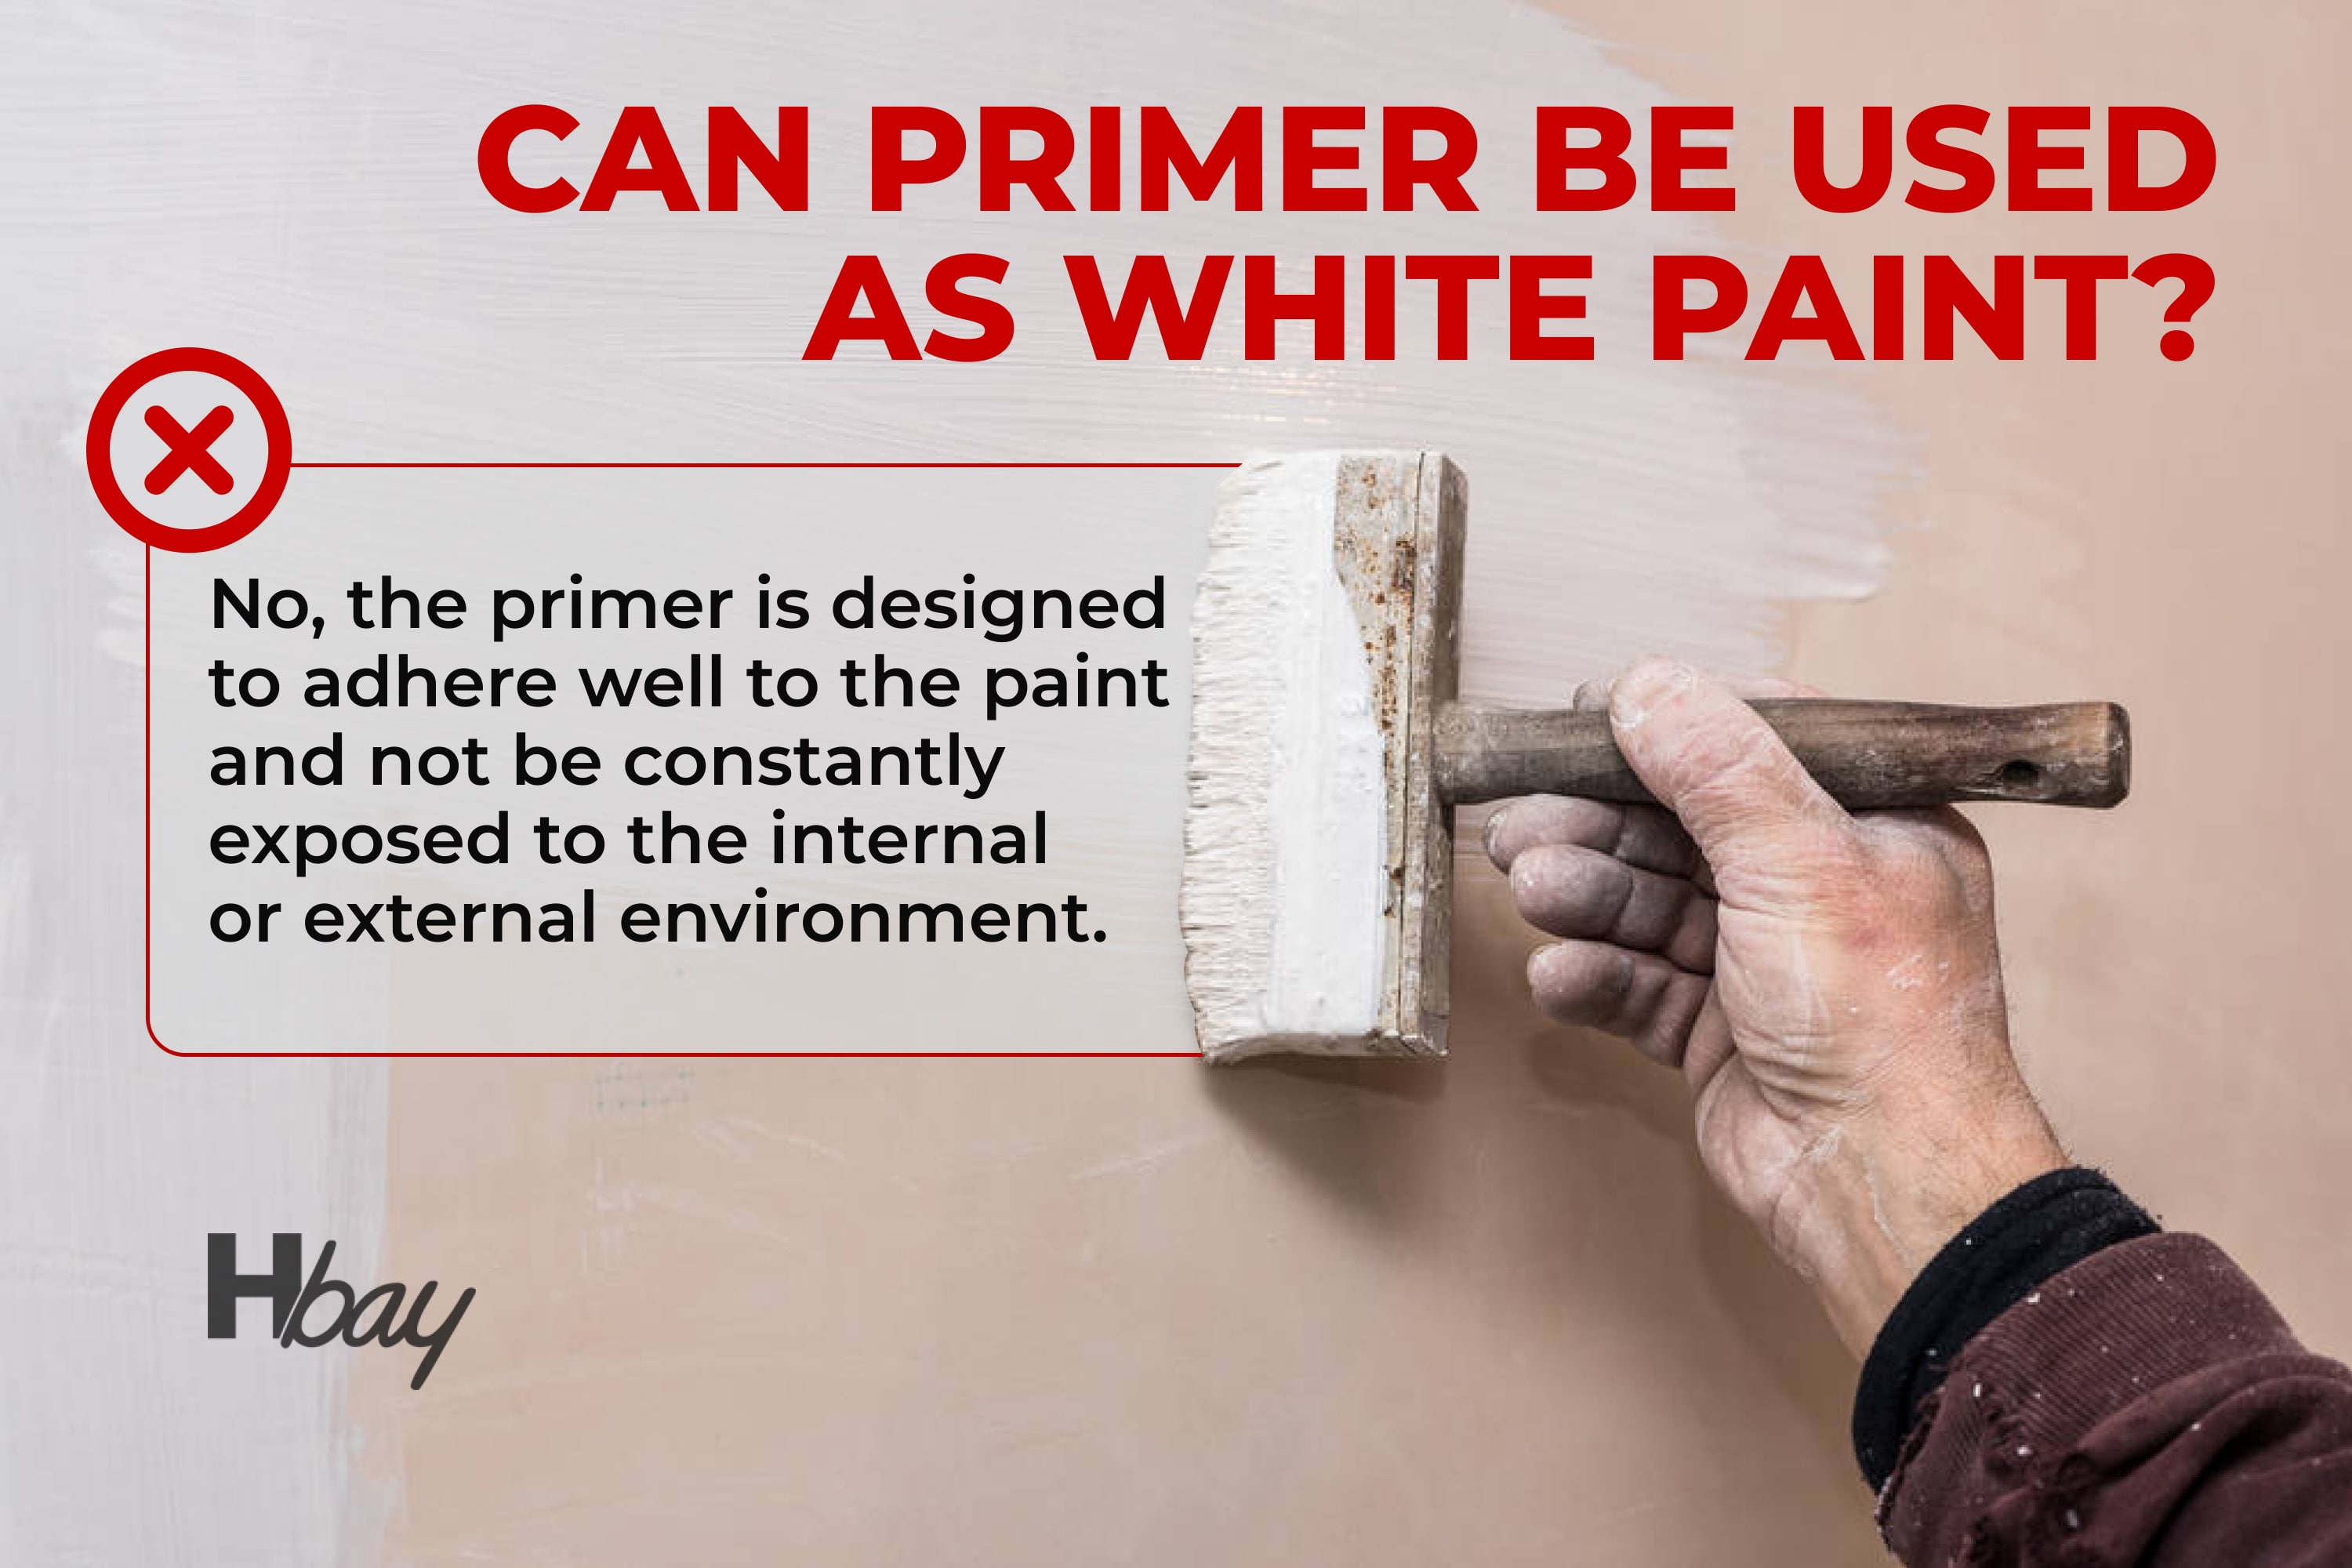 Can a Flat White Paint Be Used as a Primer